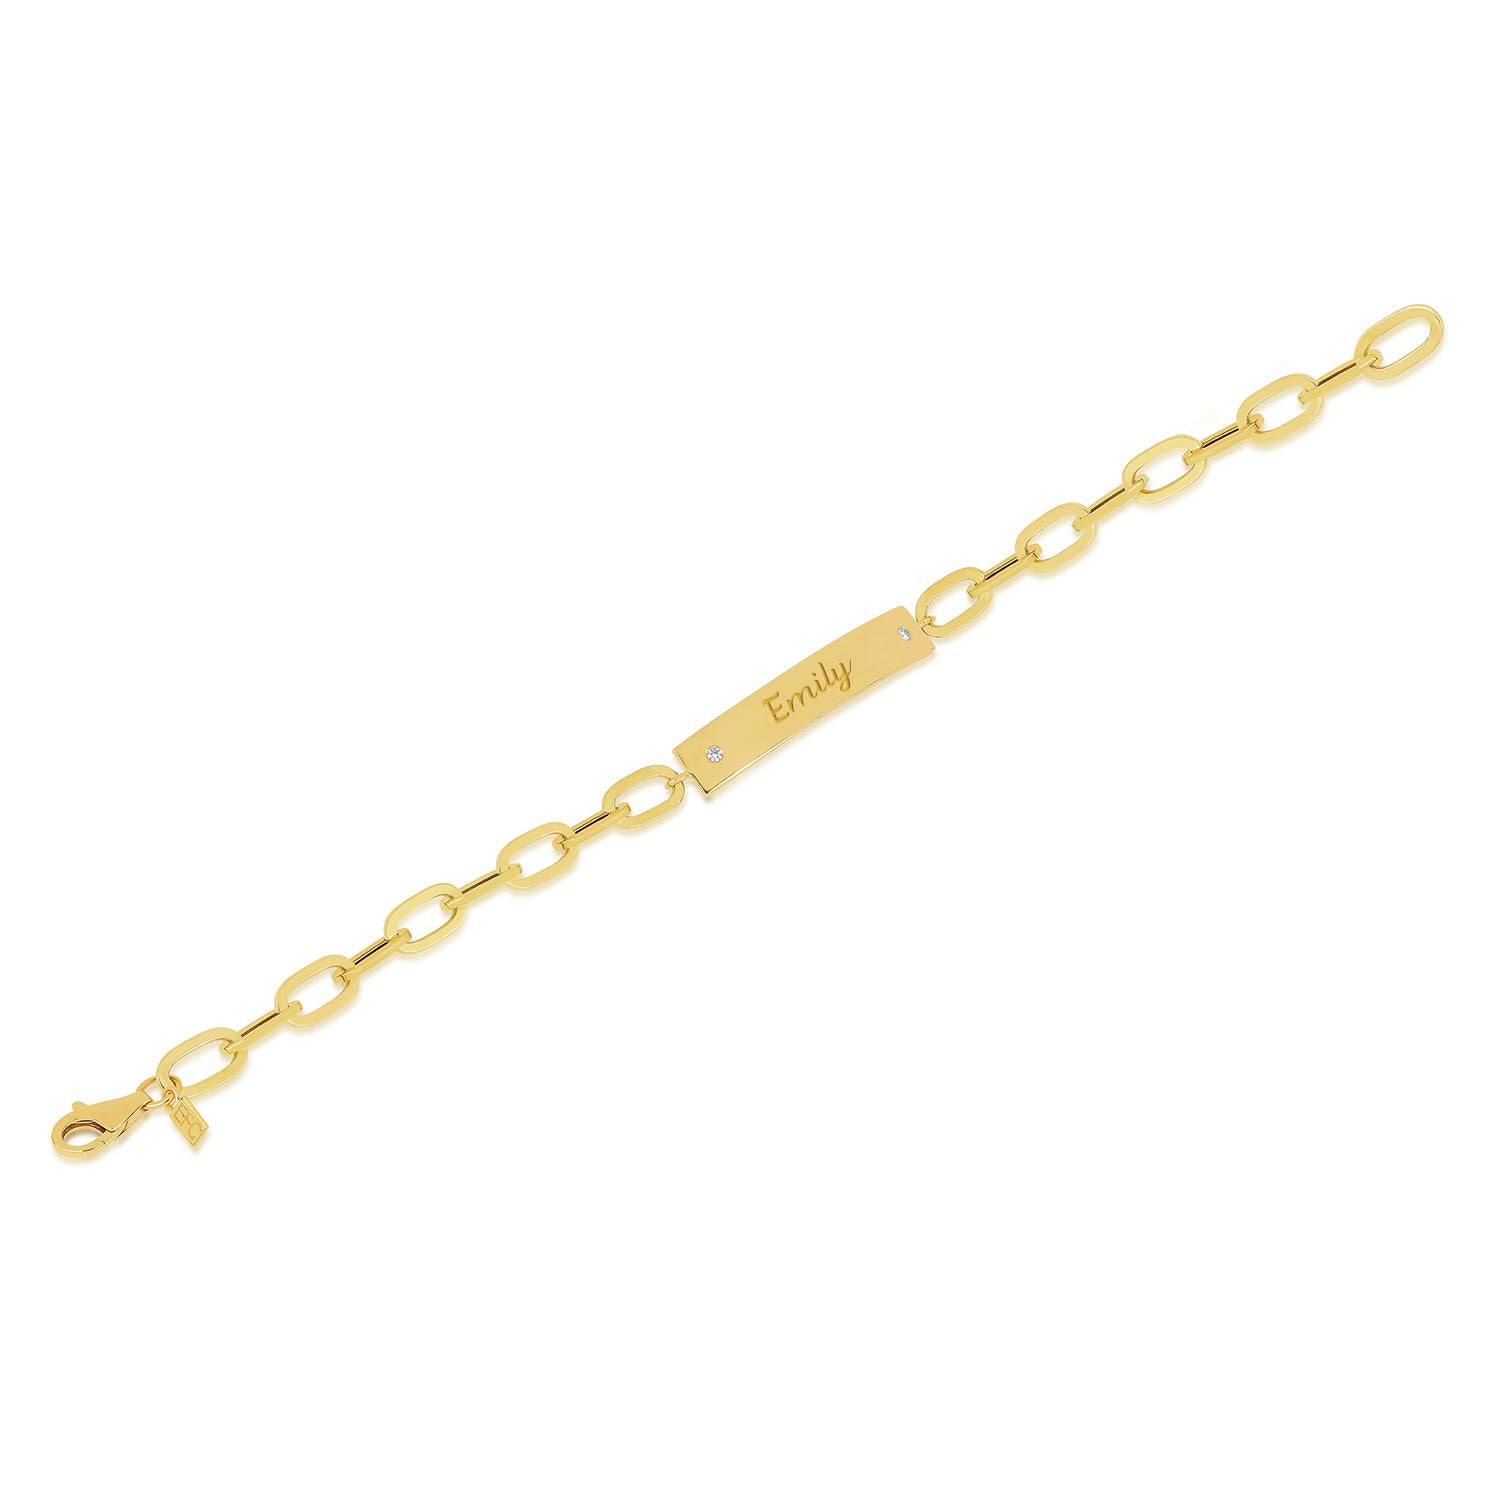 Nameplate Jumbo Link Bracelet in 14k yellow gold engraved with initials EMILY in script font